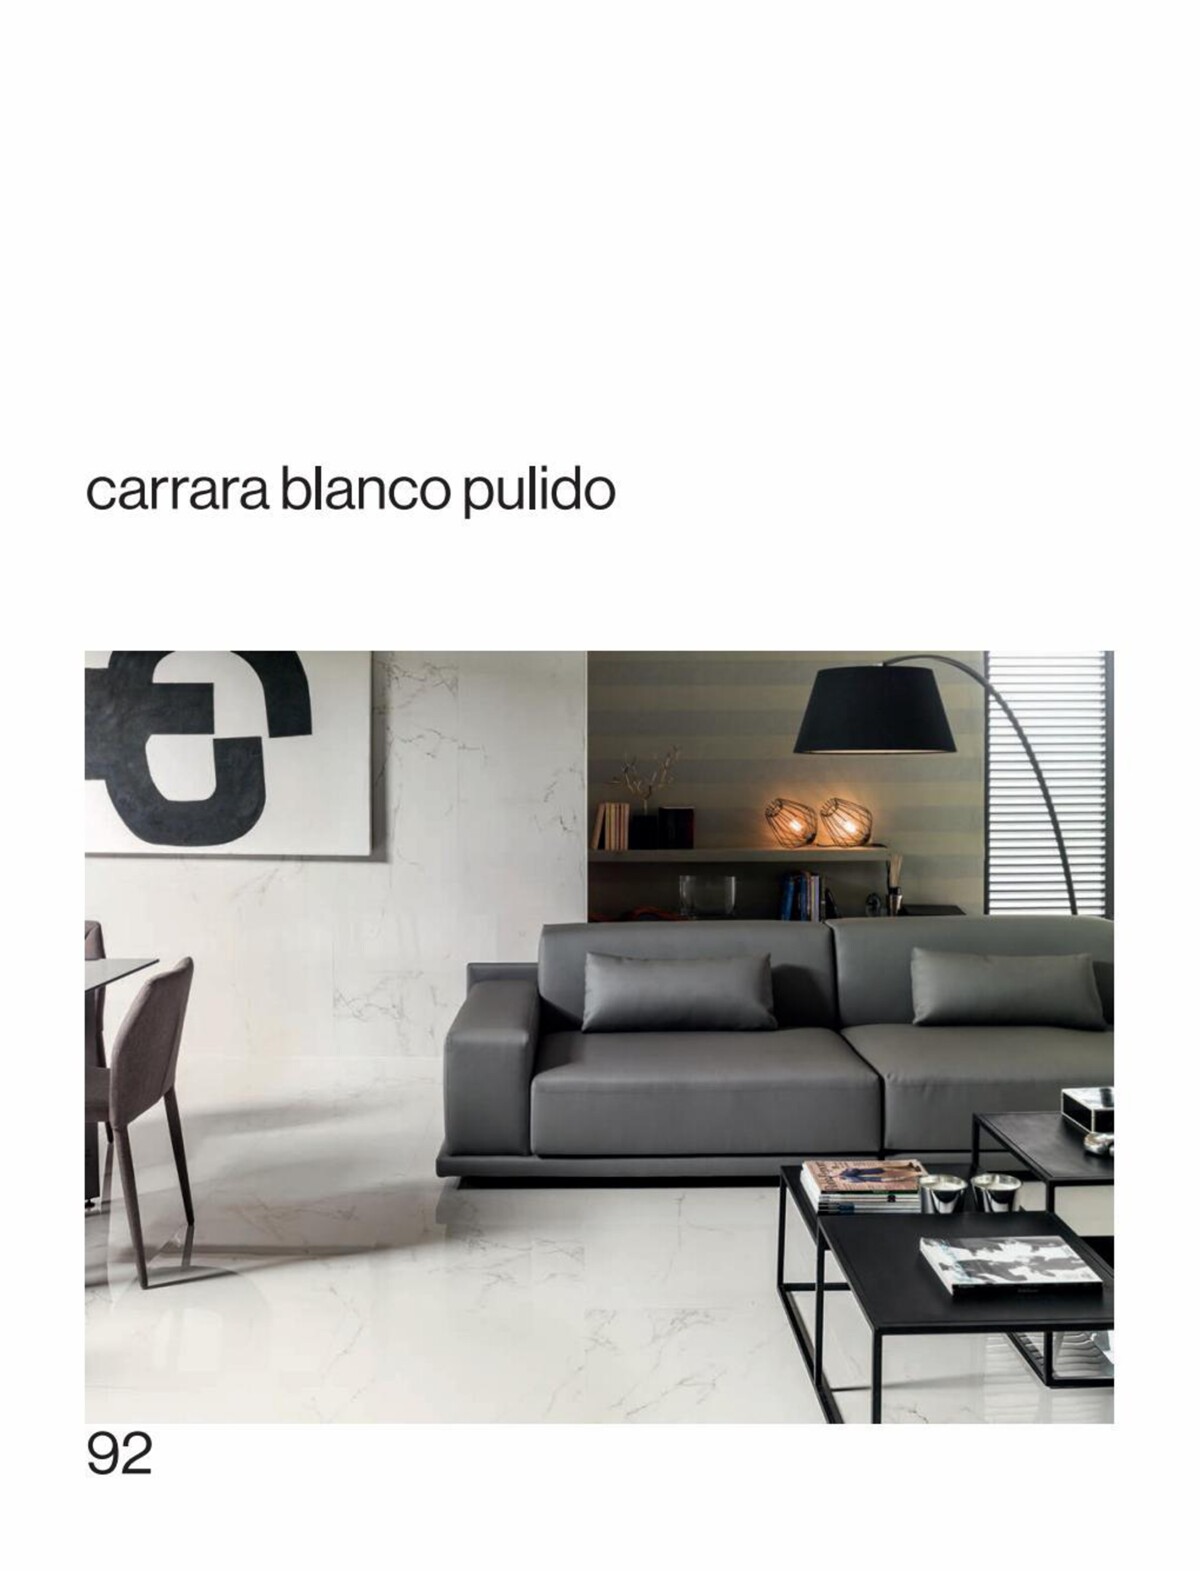 Catalogue MARMI,a ceramic tile that echoes the purity of marble, page 00092